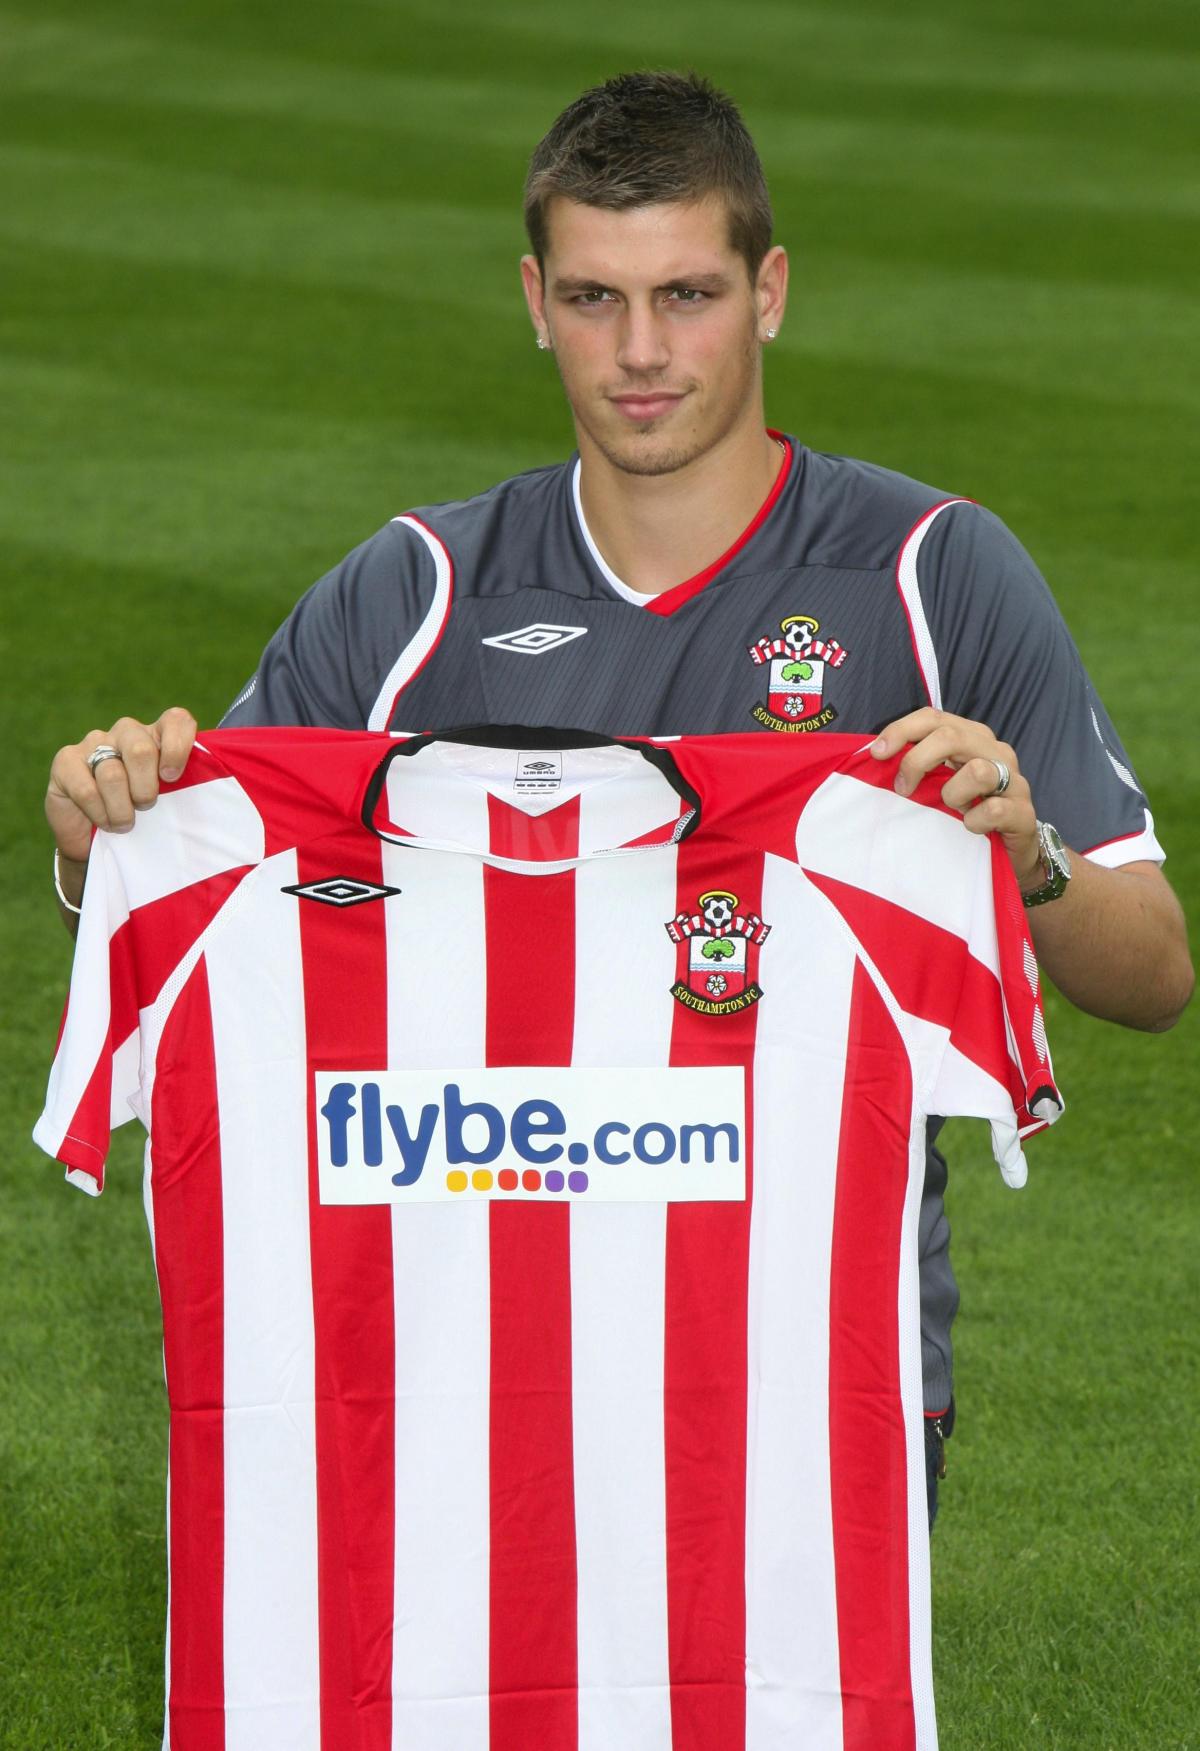 Morgan Schneiderlin poses with his new shirt after signing for Saints in June 2008.